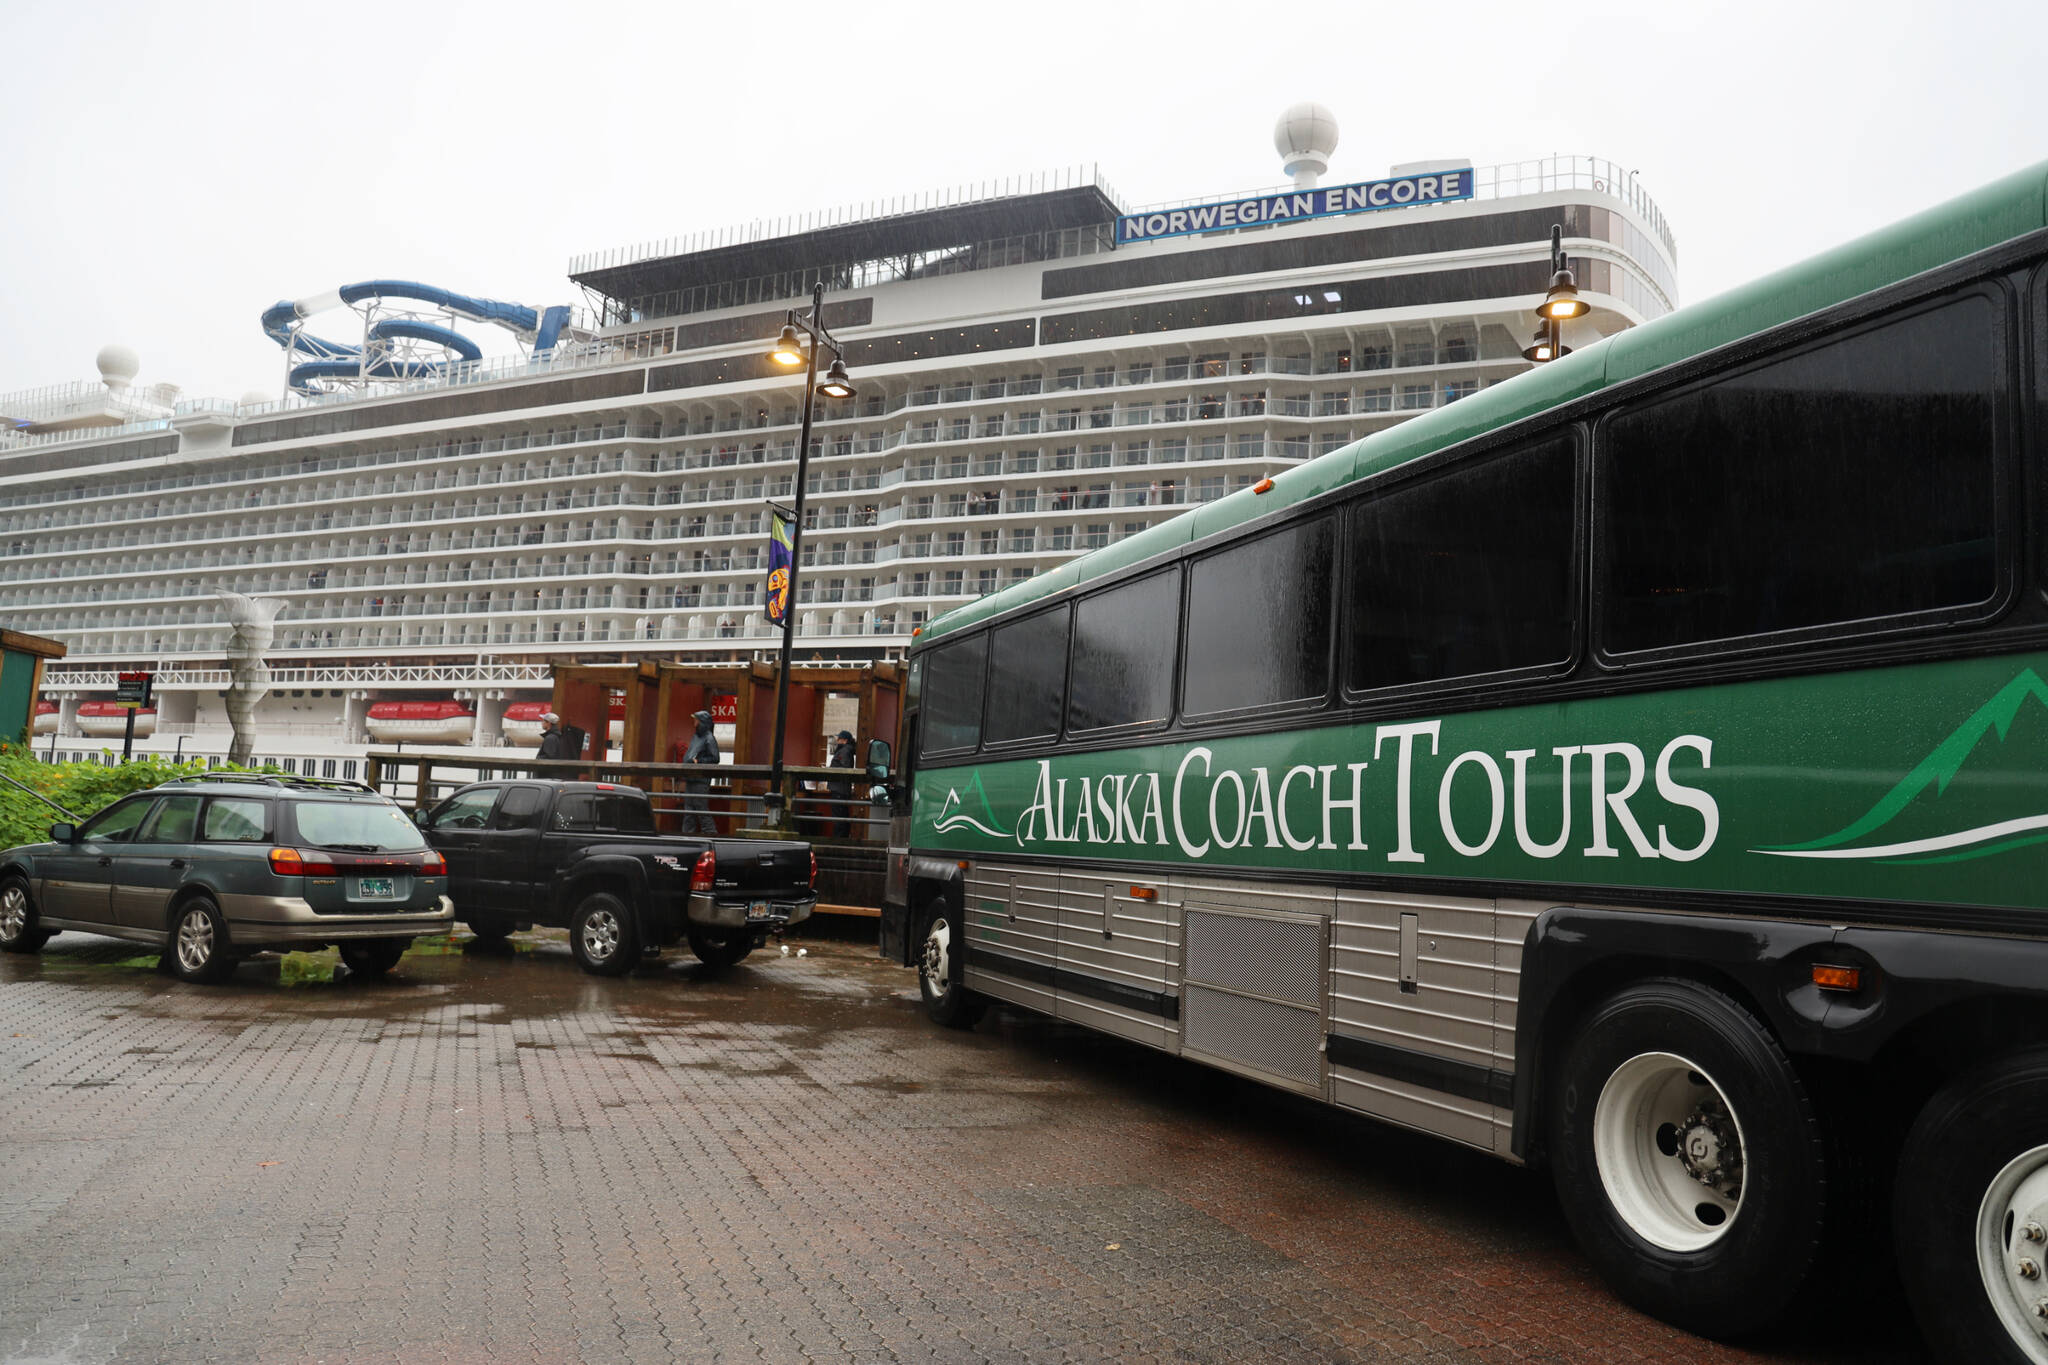 An Alaska Coach Tours bus parks near where the Norwegian Encore was docked. Alexandra Pierce, the CBJ tourism manager, said this year’s season went “relatively smoothly” and said the revival of tourism was overall well received by the residents and downtown businesses. (Clarise Larson / Juneau Empire)